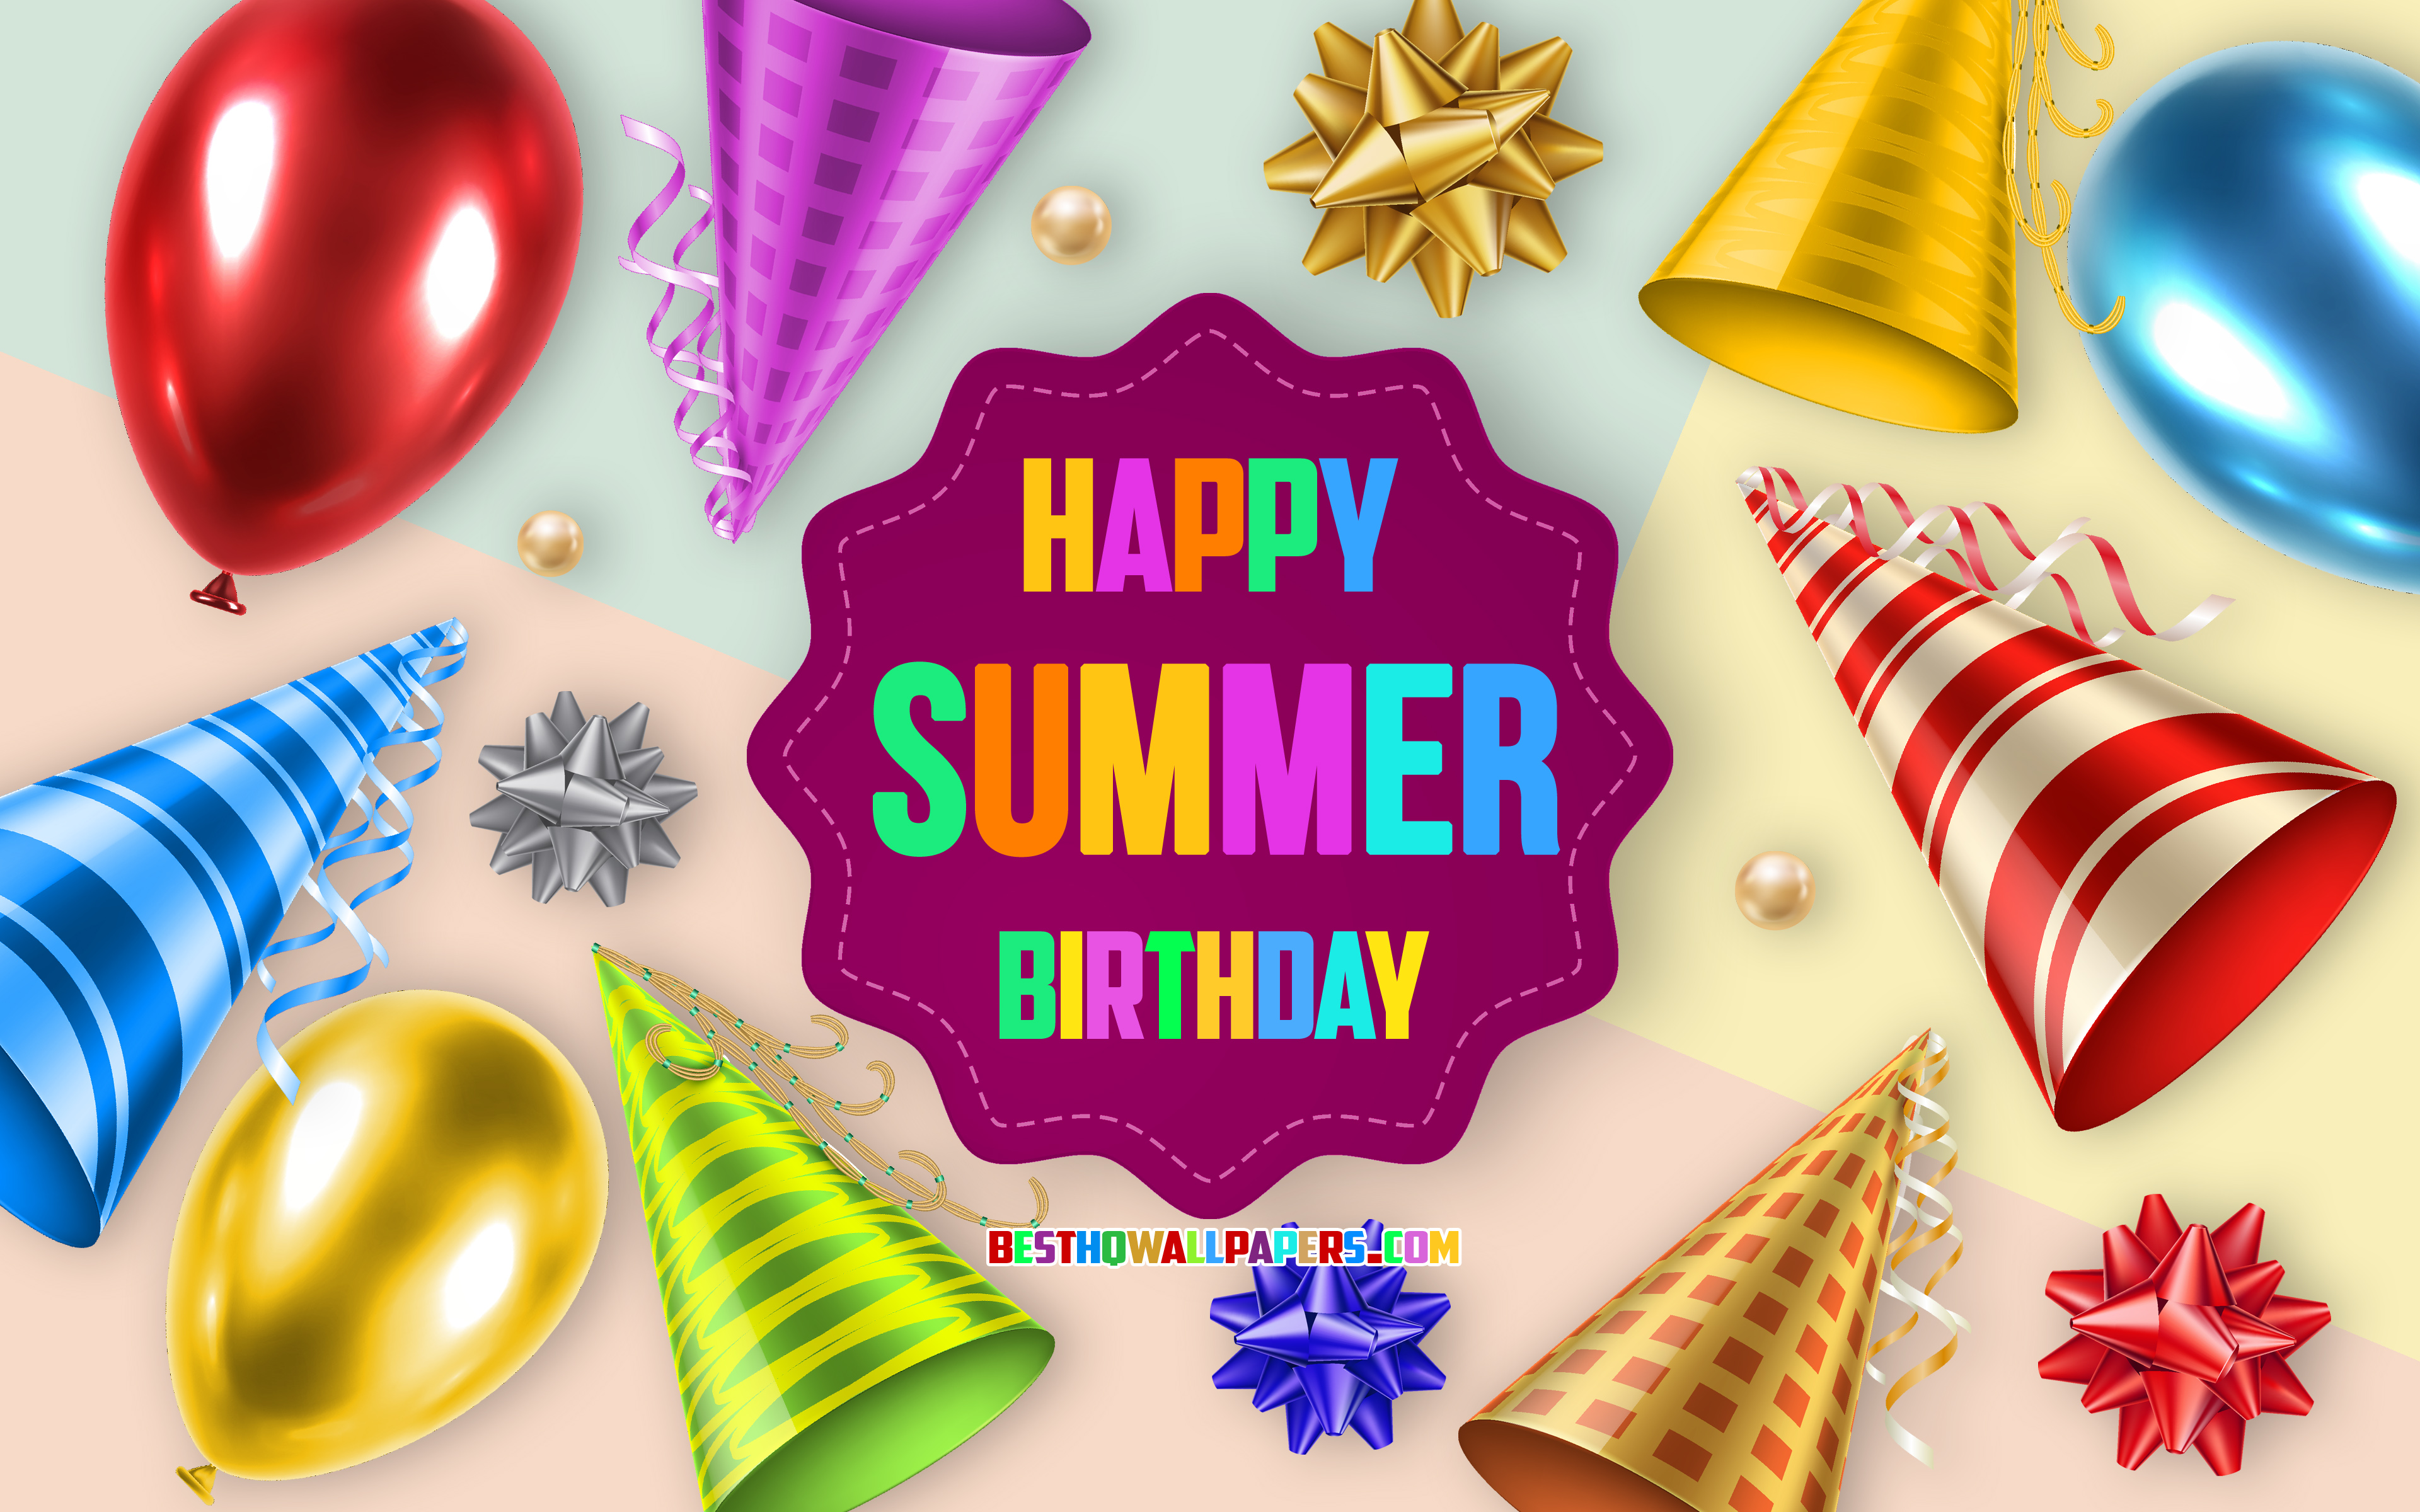 Download wallpaper Happy Birthday Summer, 4k, Birthday Balloon Background, Summer, creative art, Happy Summer birthday, silk bows, Summer Birthday, Birthday Party Background for desktop with resolution 3840x2400. High Quality HD picture wallpaper